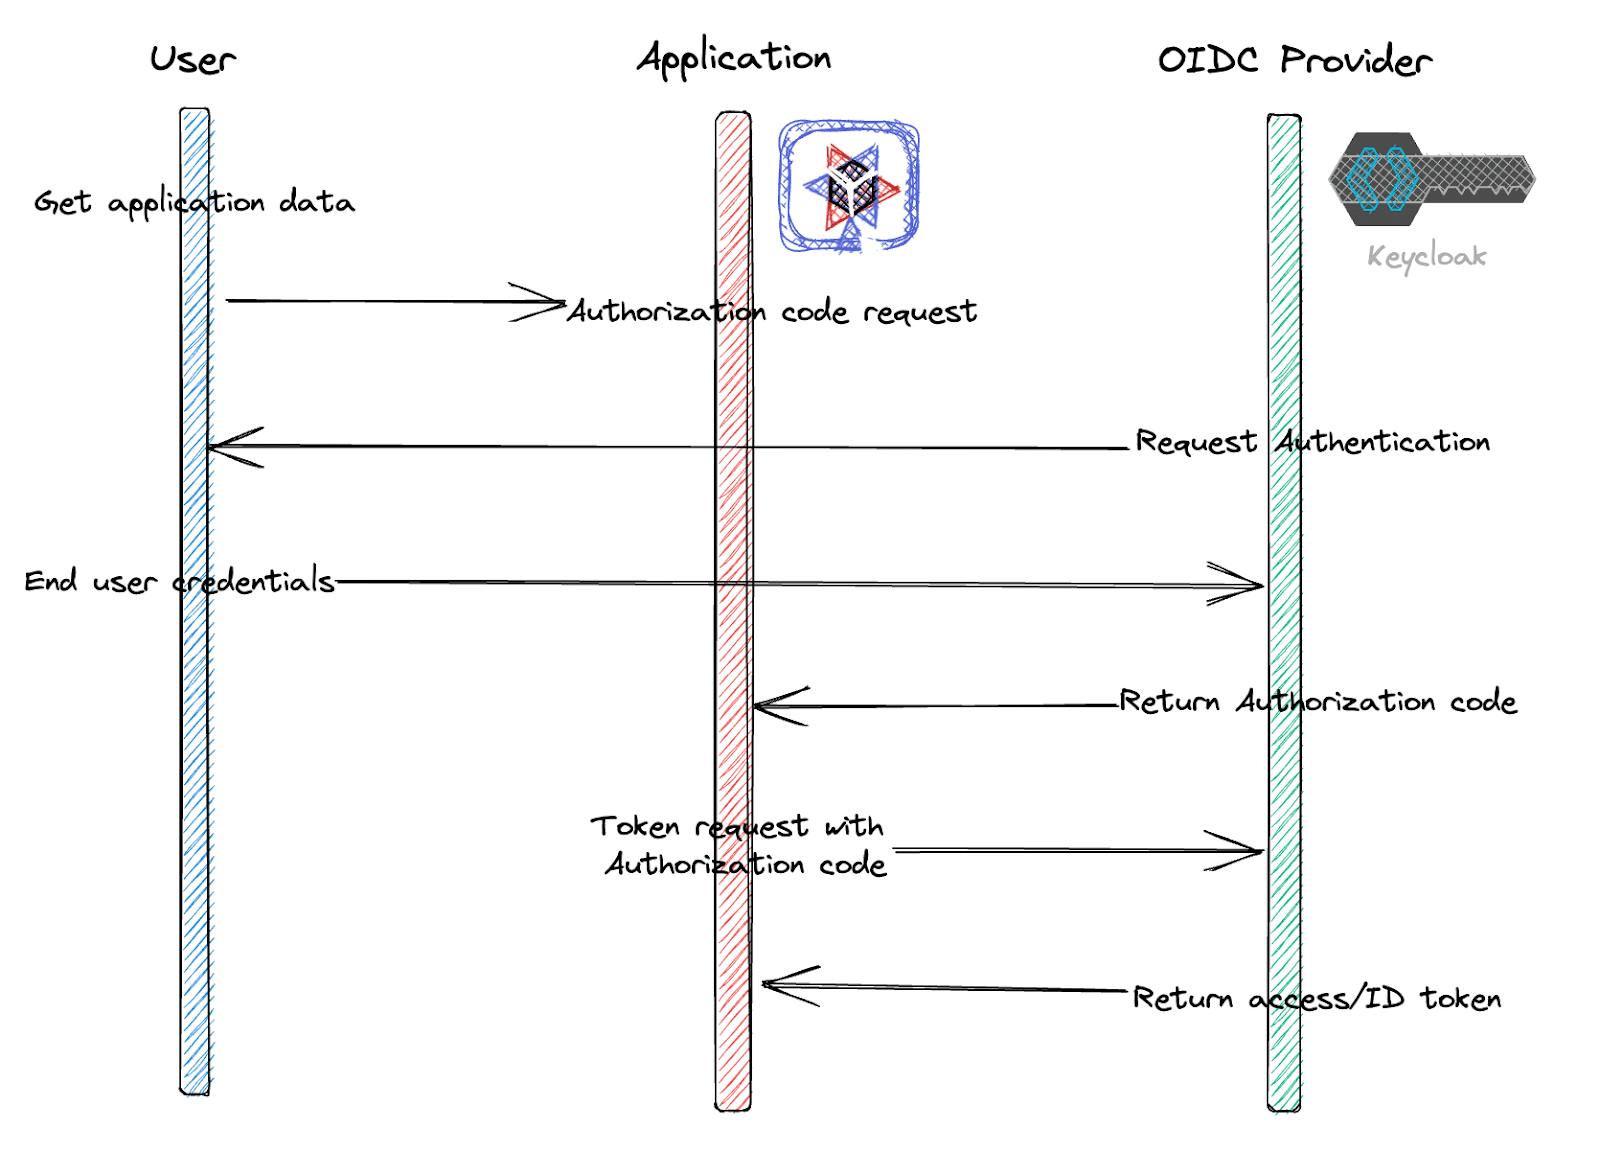 OpenID Connect authorization code flow from CNCF Documentation on Open ID Connect with Keycloak